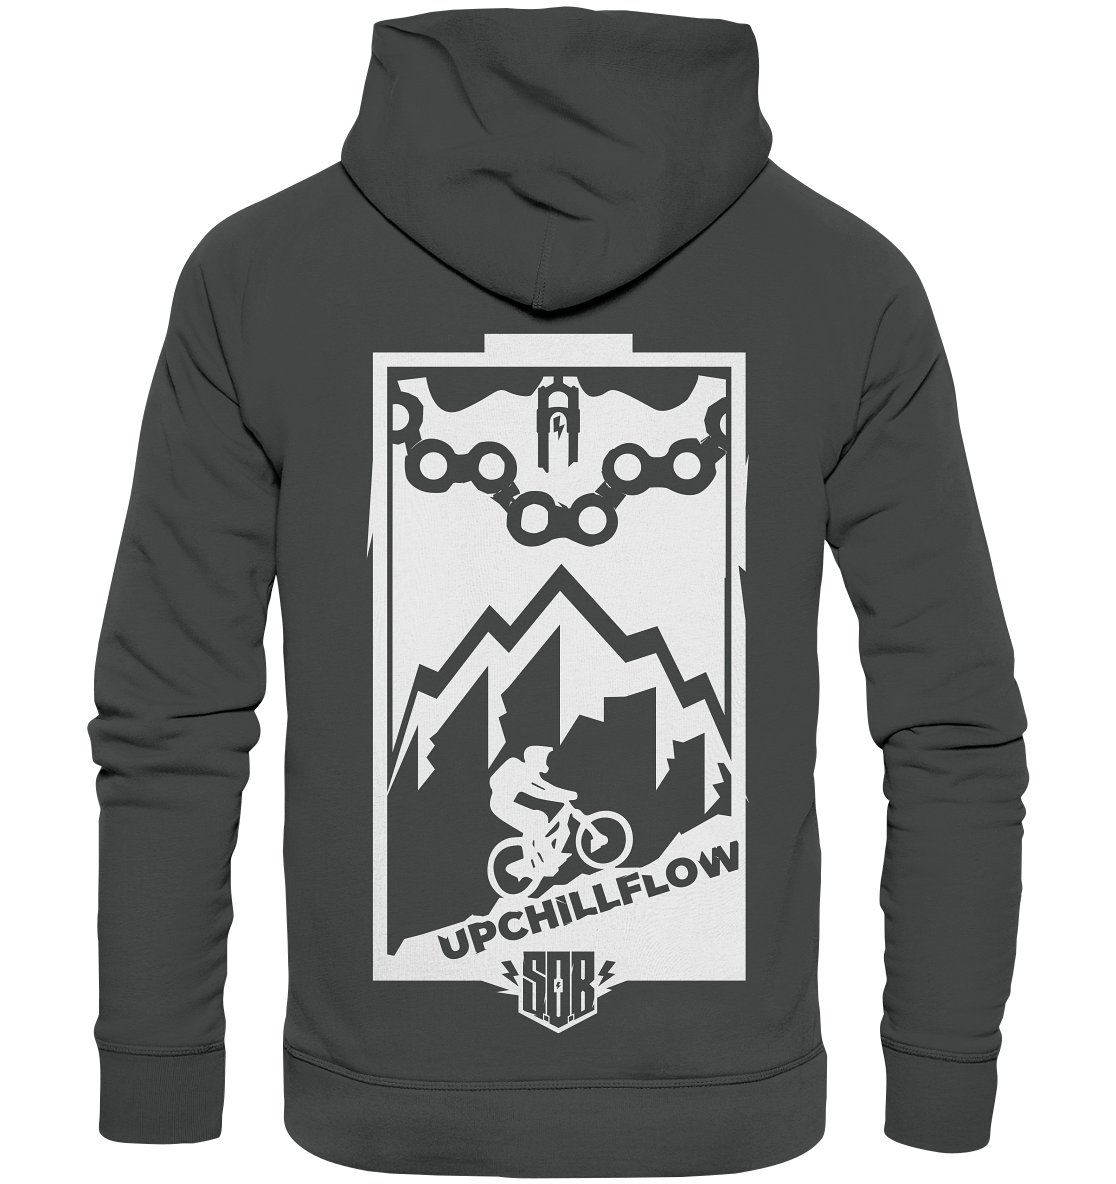 Sons of Battery® - E-MTB Brand & Community Hoodies Anthracite / XS Sons of Battery - Upchillflow - Organic Fashion Hoodie E-Bike-Community